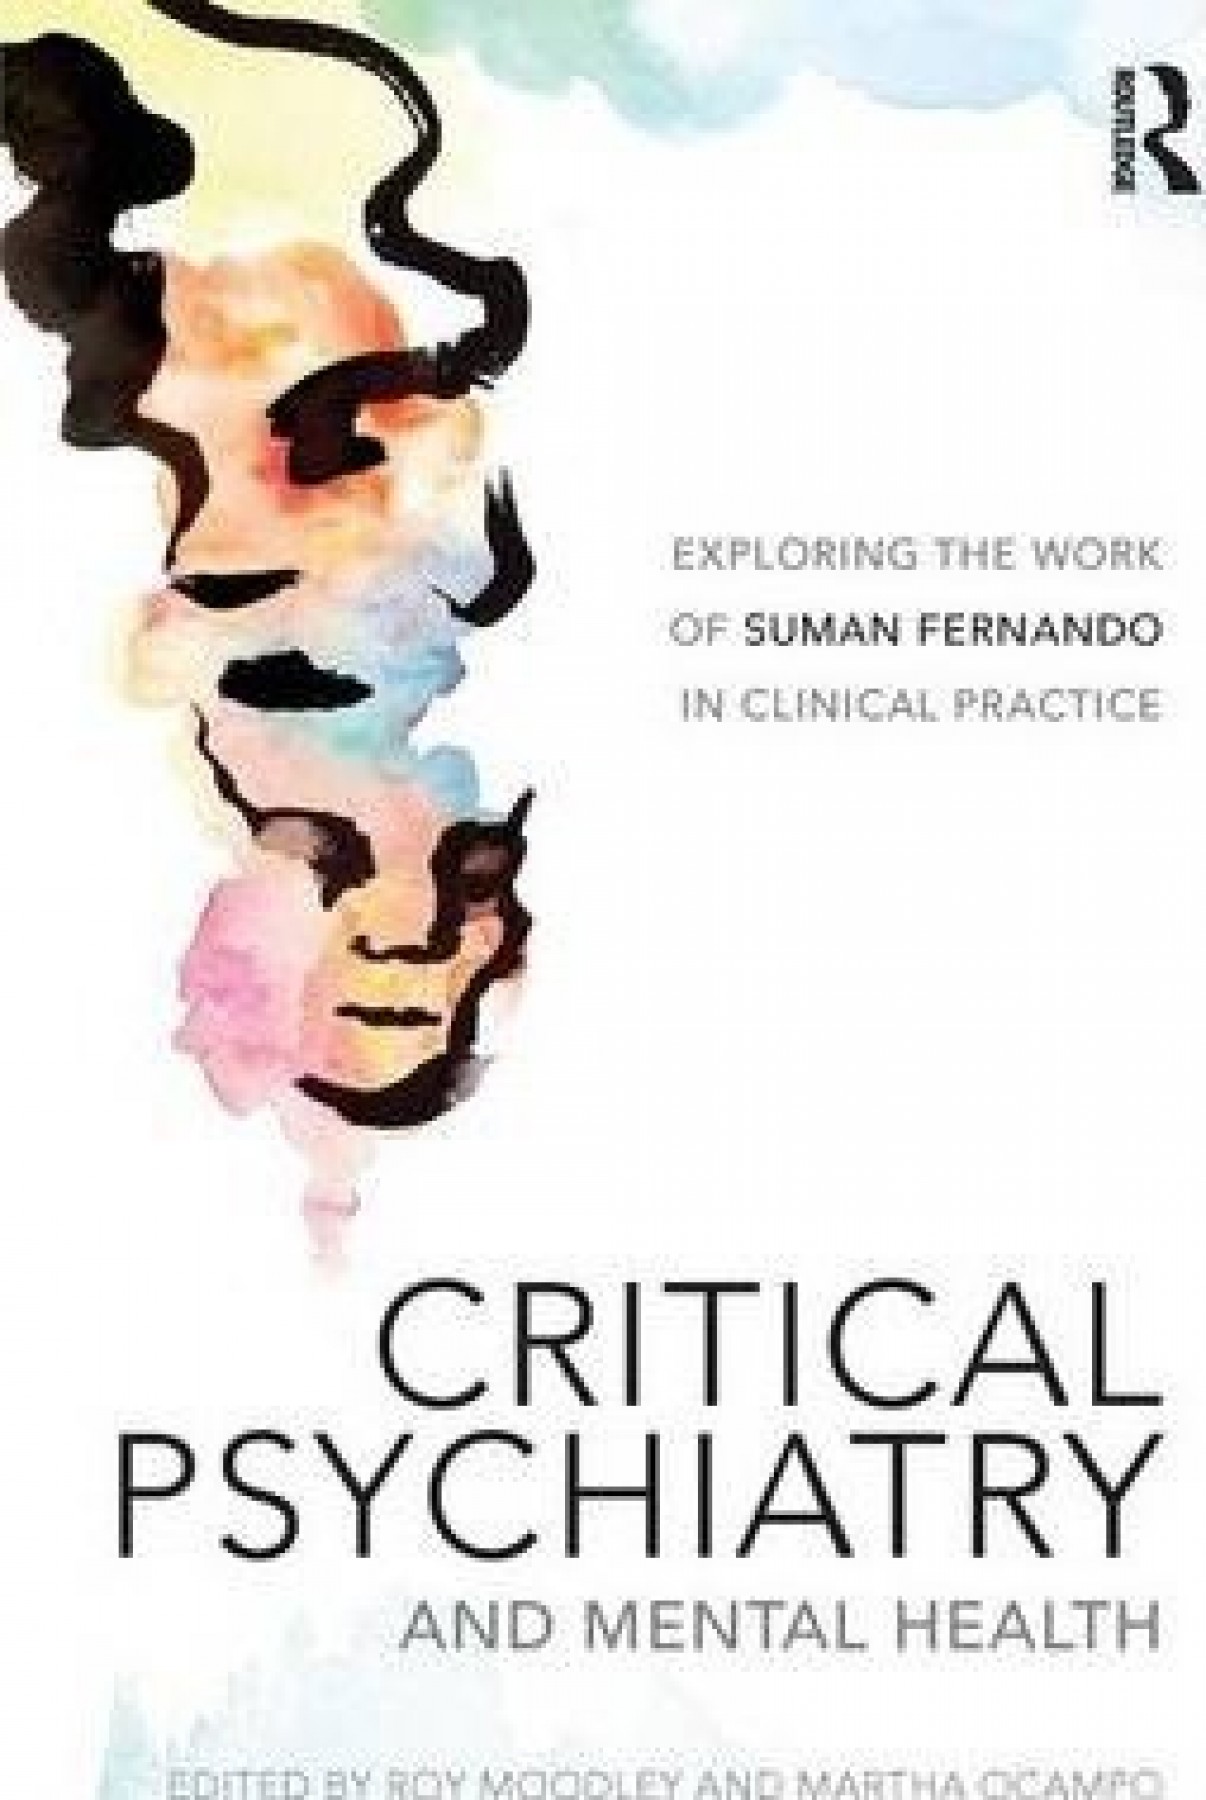 Critical Psychiatry and Mental Health: Exploring the work of Suman Fernando in clinical practice